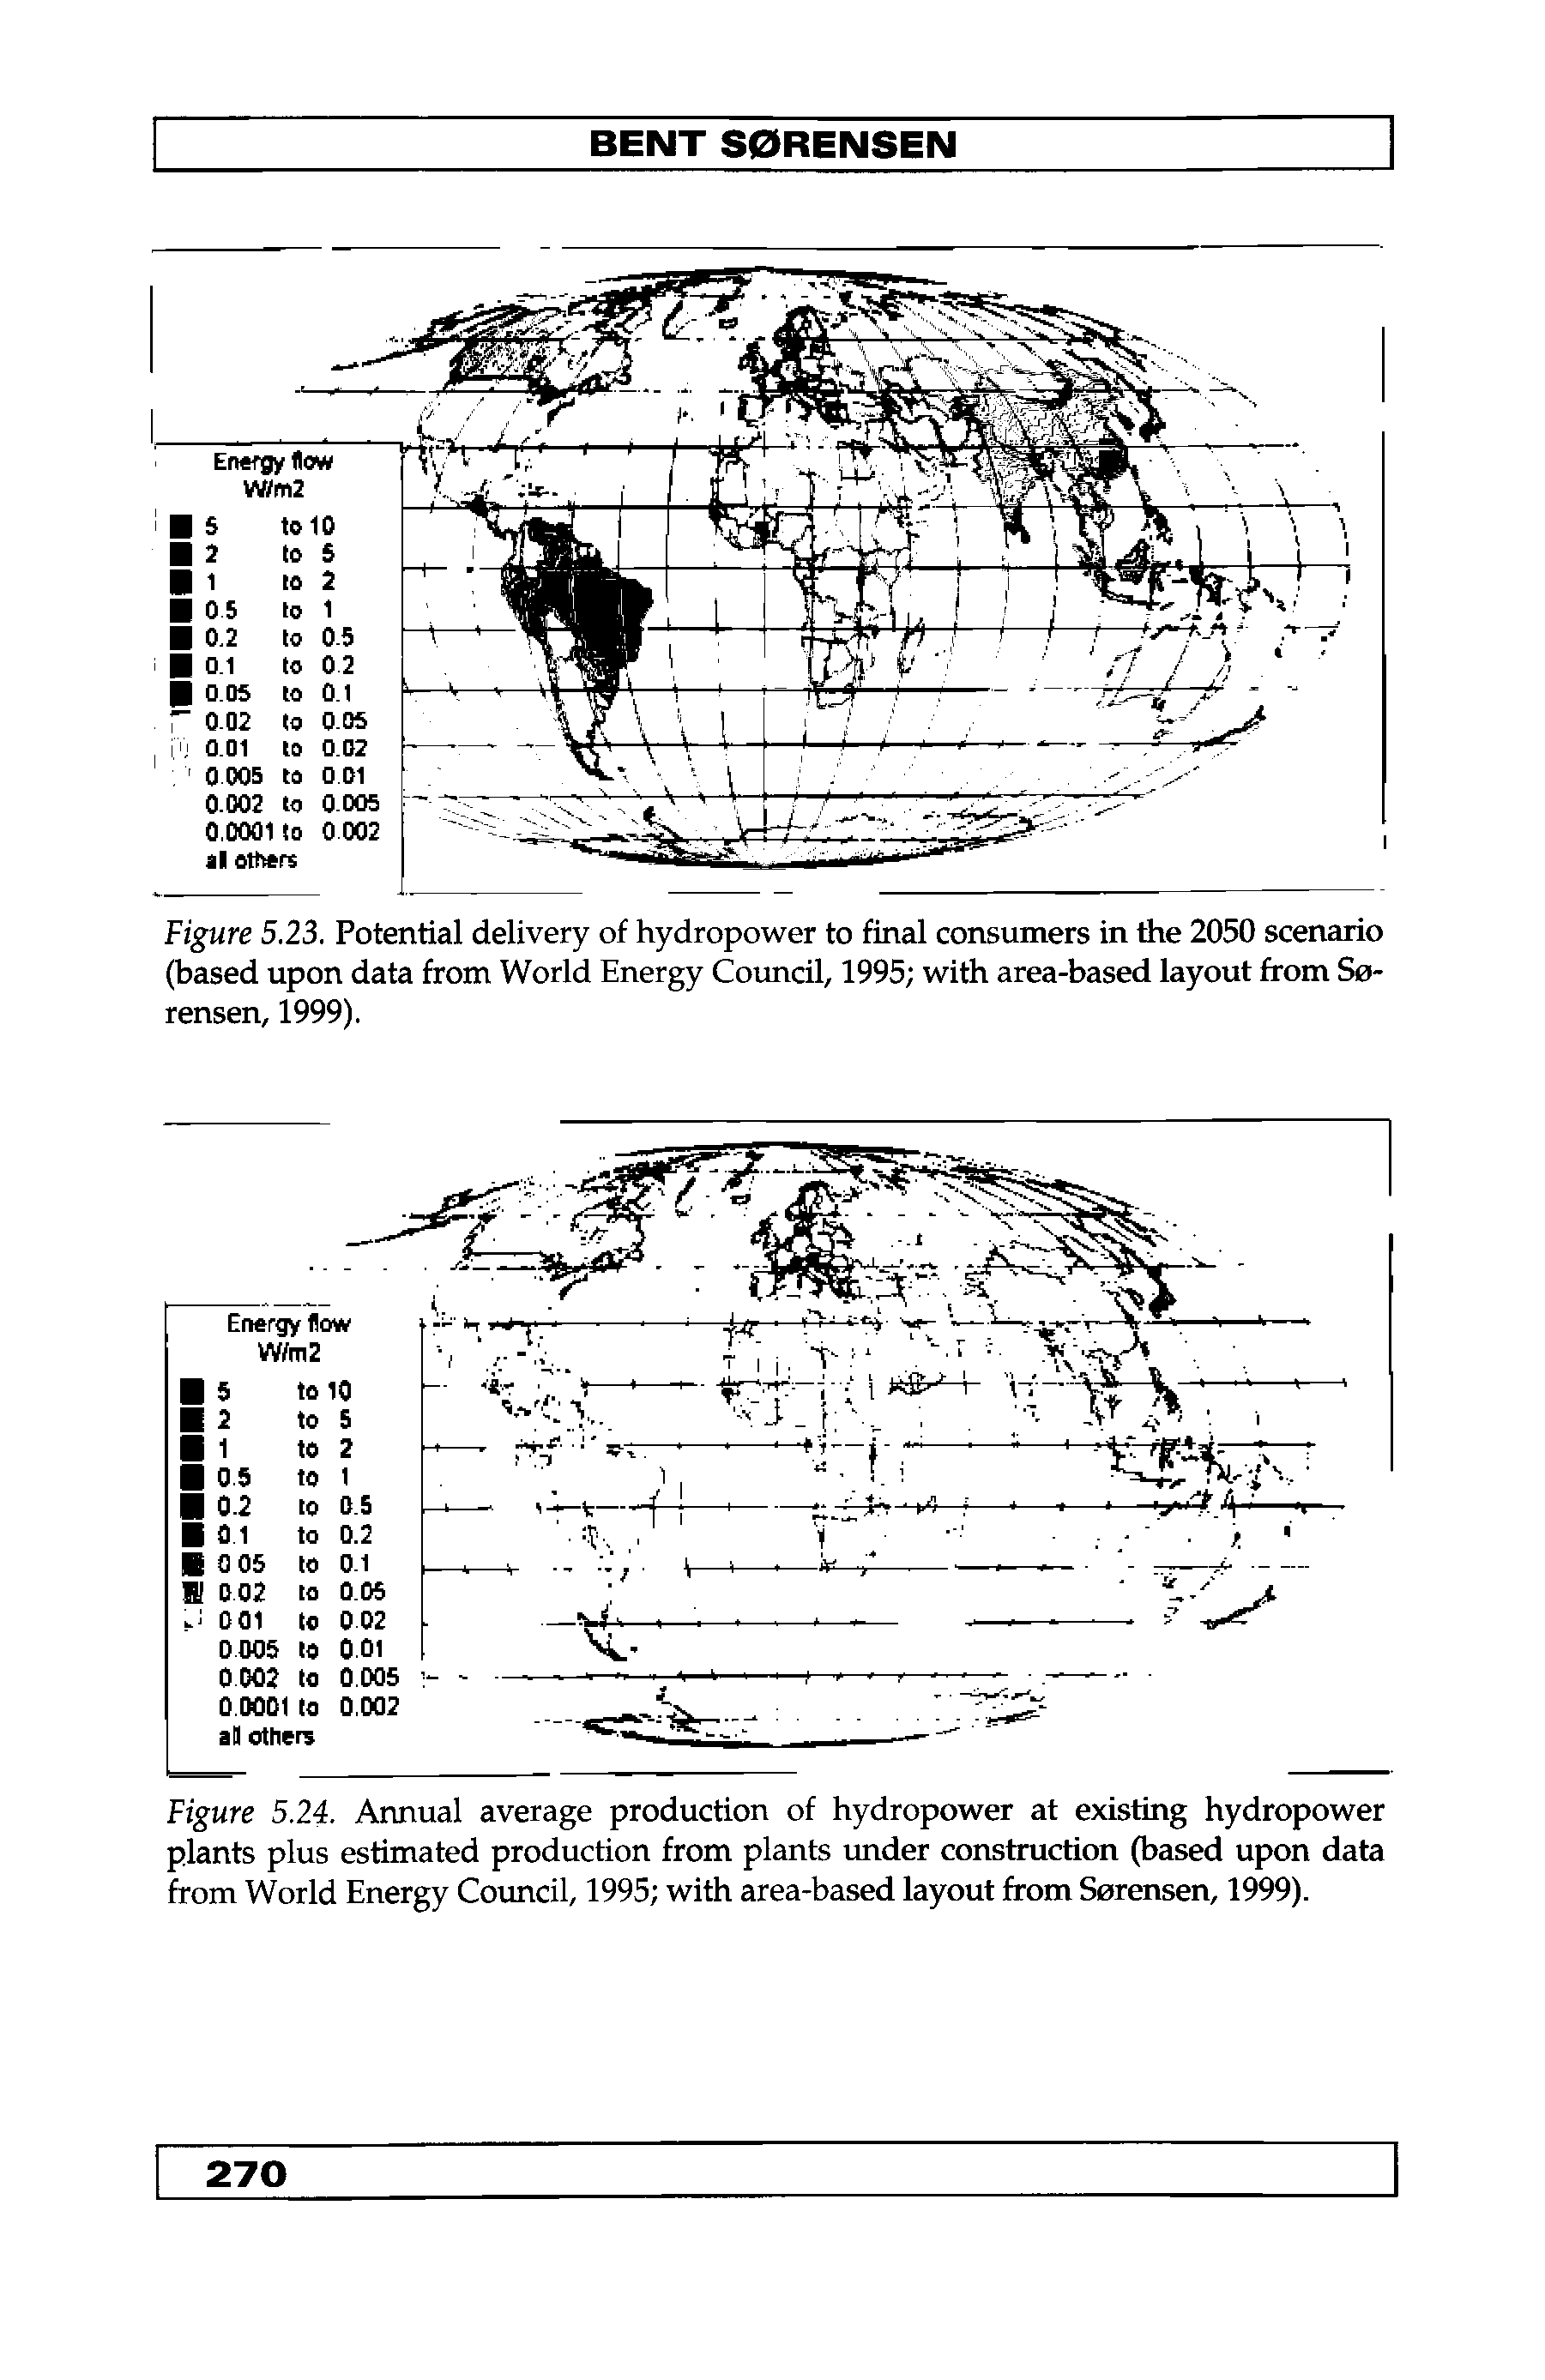 Figure 5.23. Potential delivery of hydropower to final consumers in the 2050 scenario (based upon data from World Energy Council, 1995 with area-based layout from Sorensen, 1999).